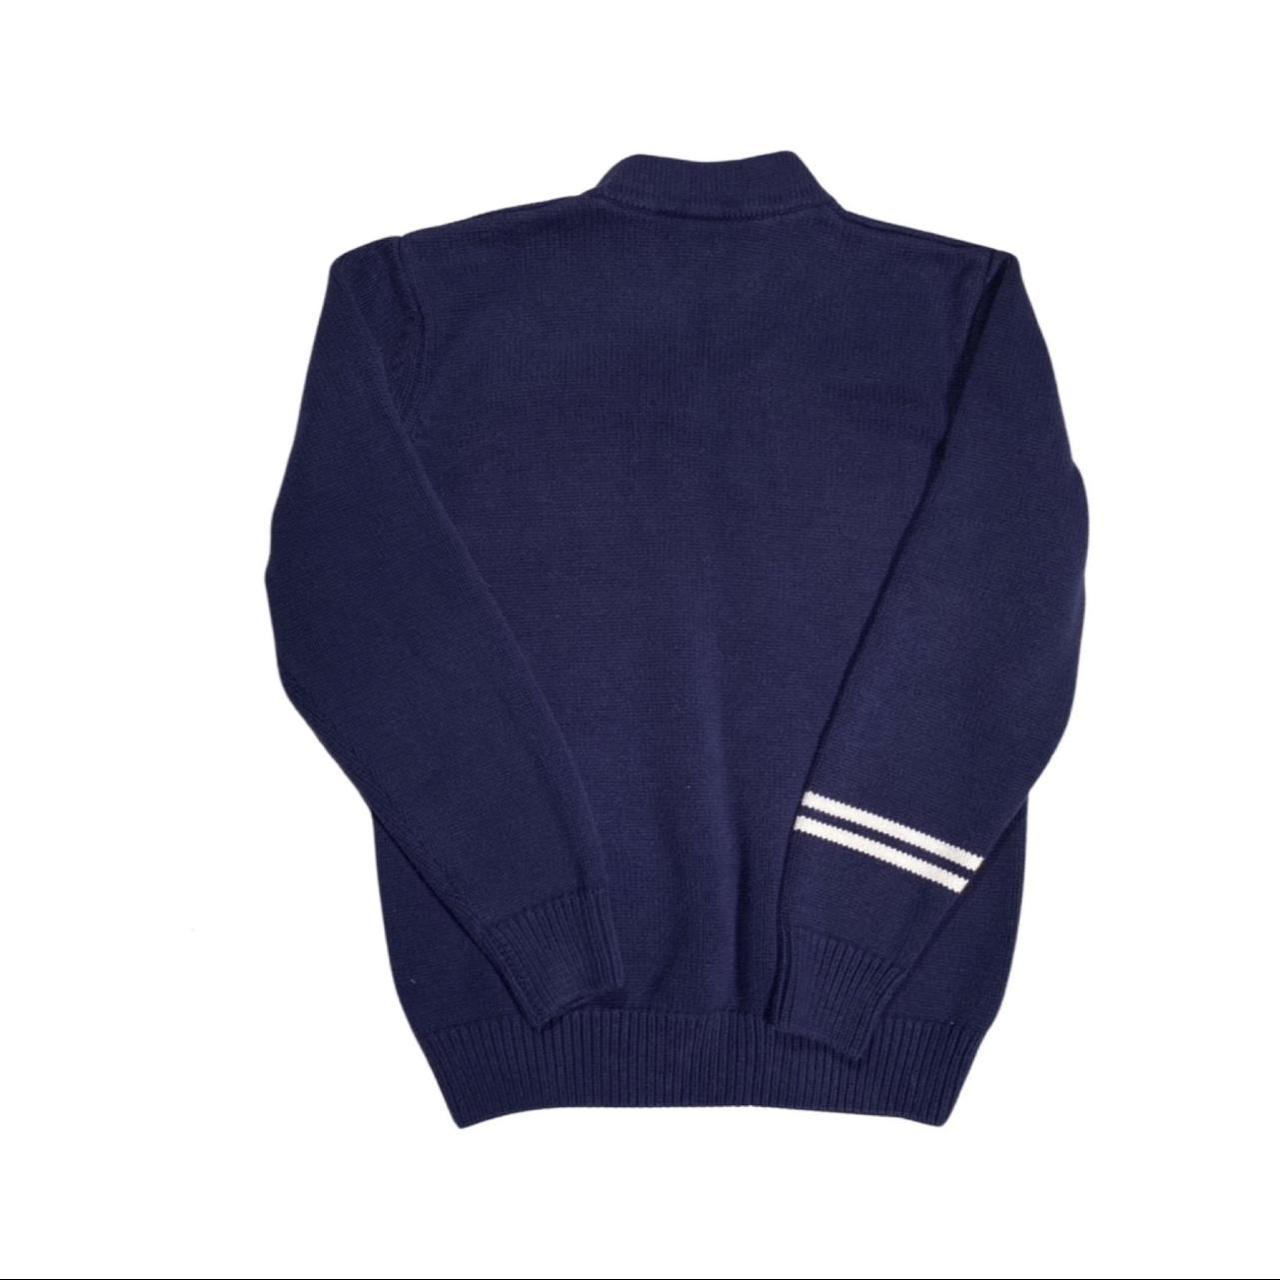 Lacoste Live Men's Blue and White Jumper (2)